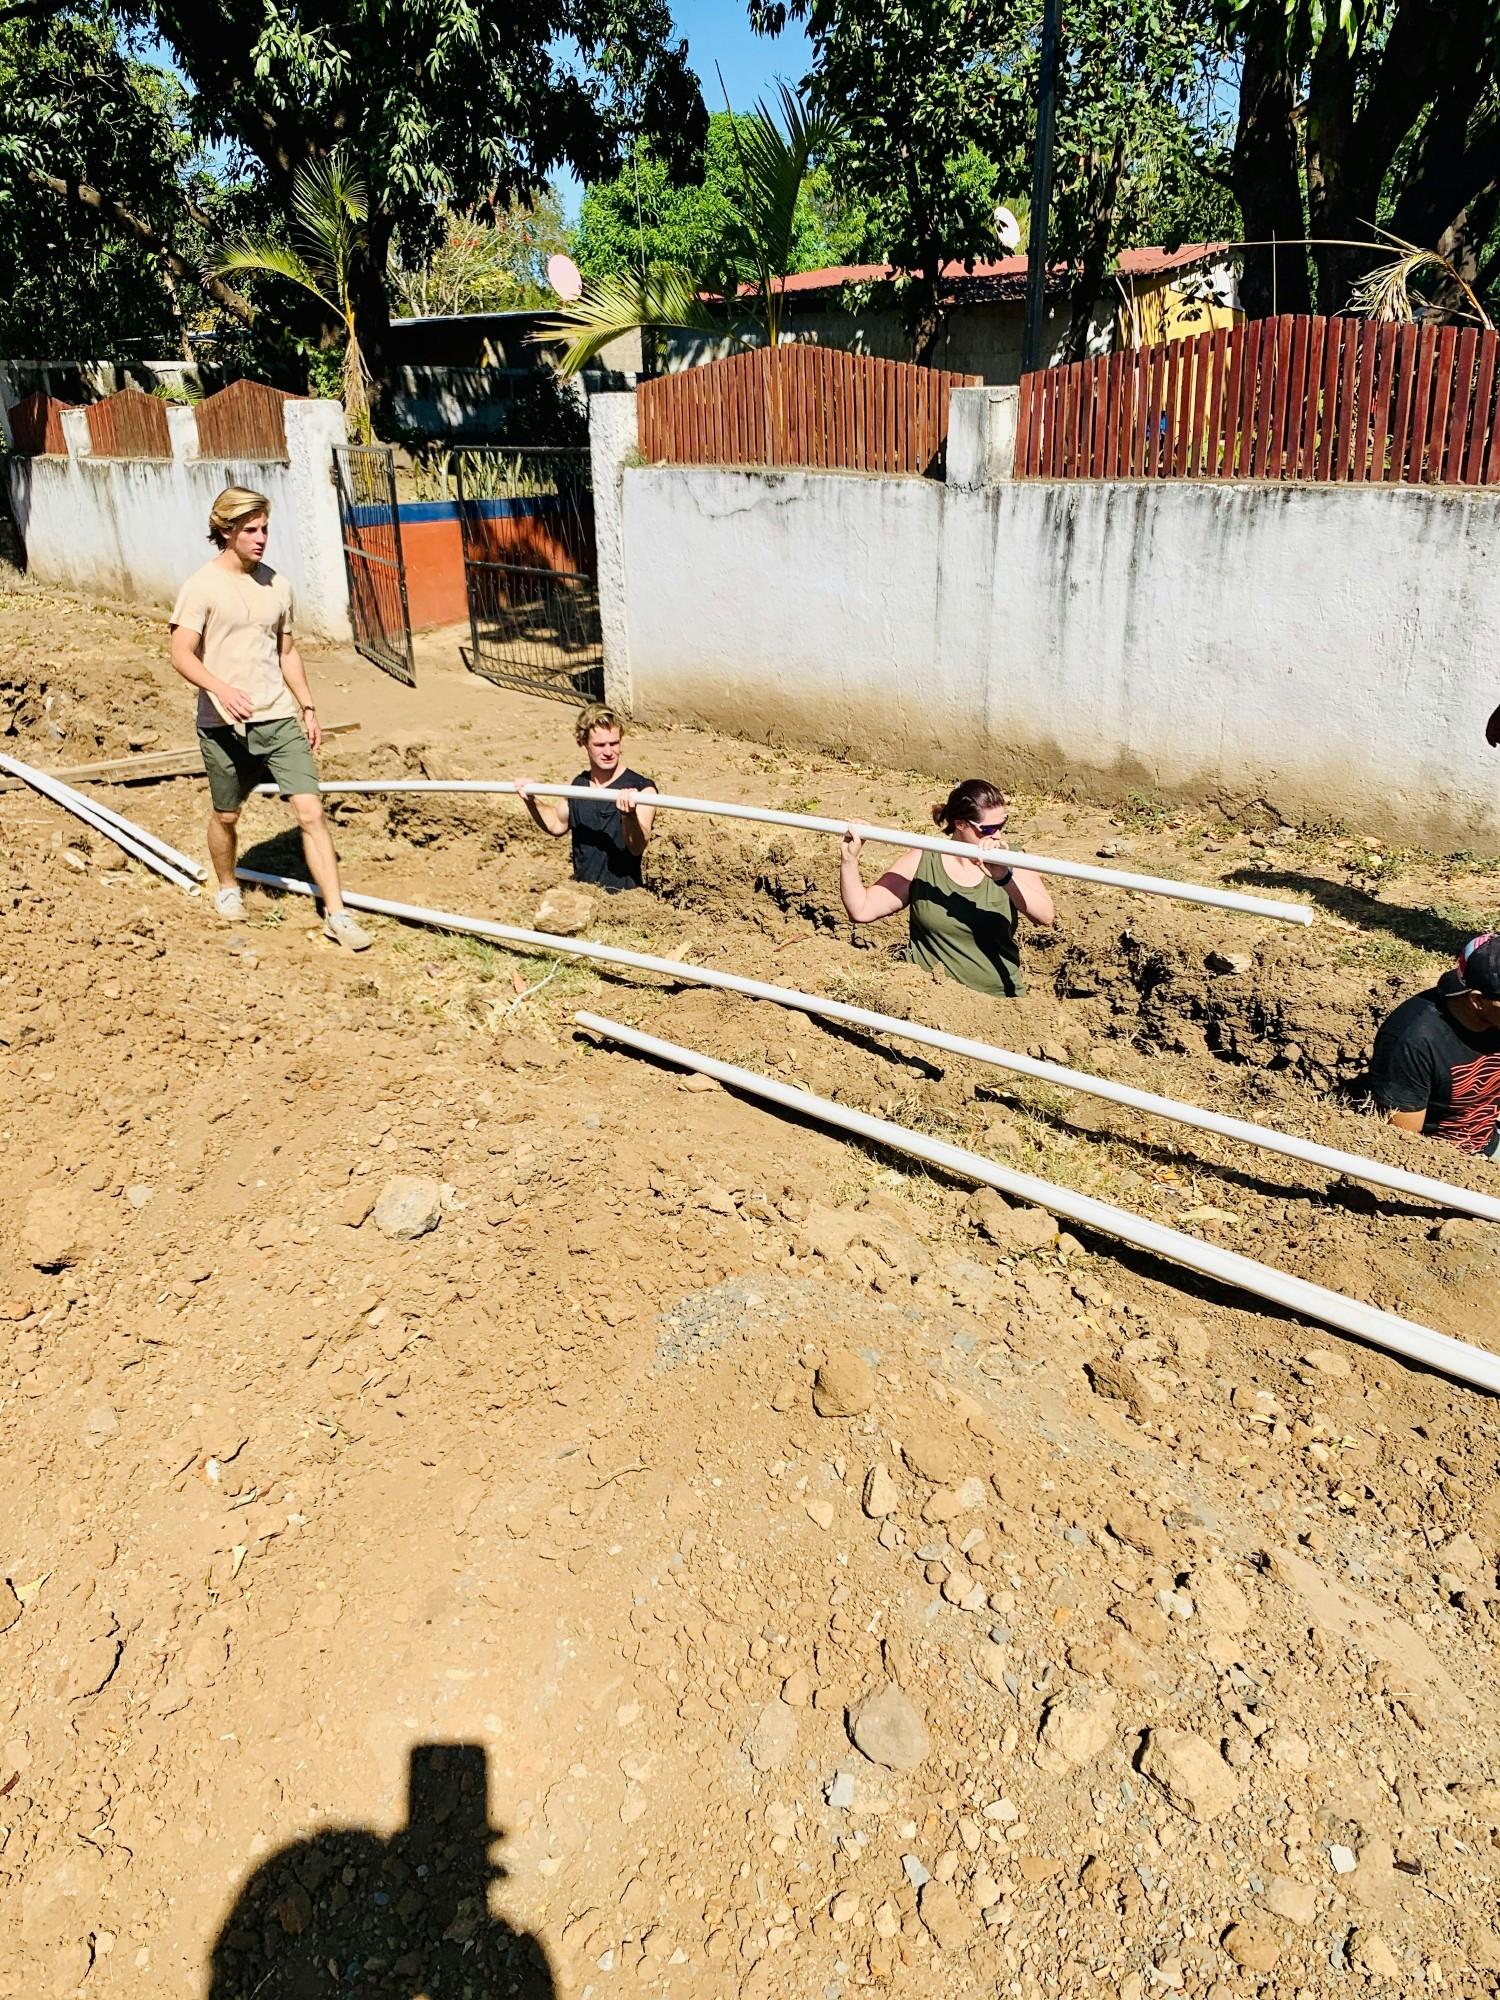 Installing distribution pipeline from another water well that will distribute water directly into 32 families' homes